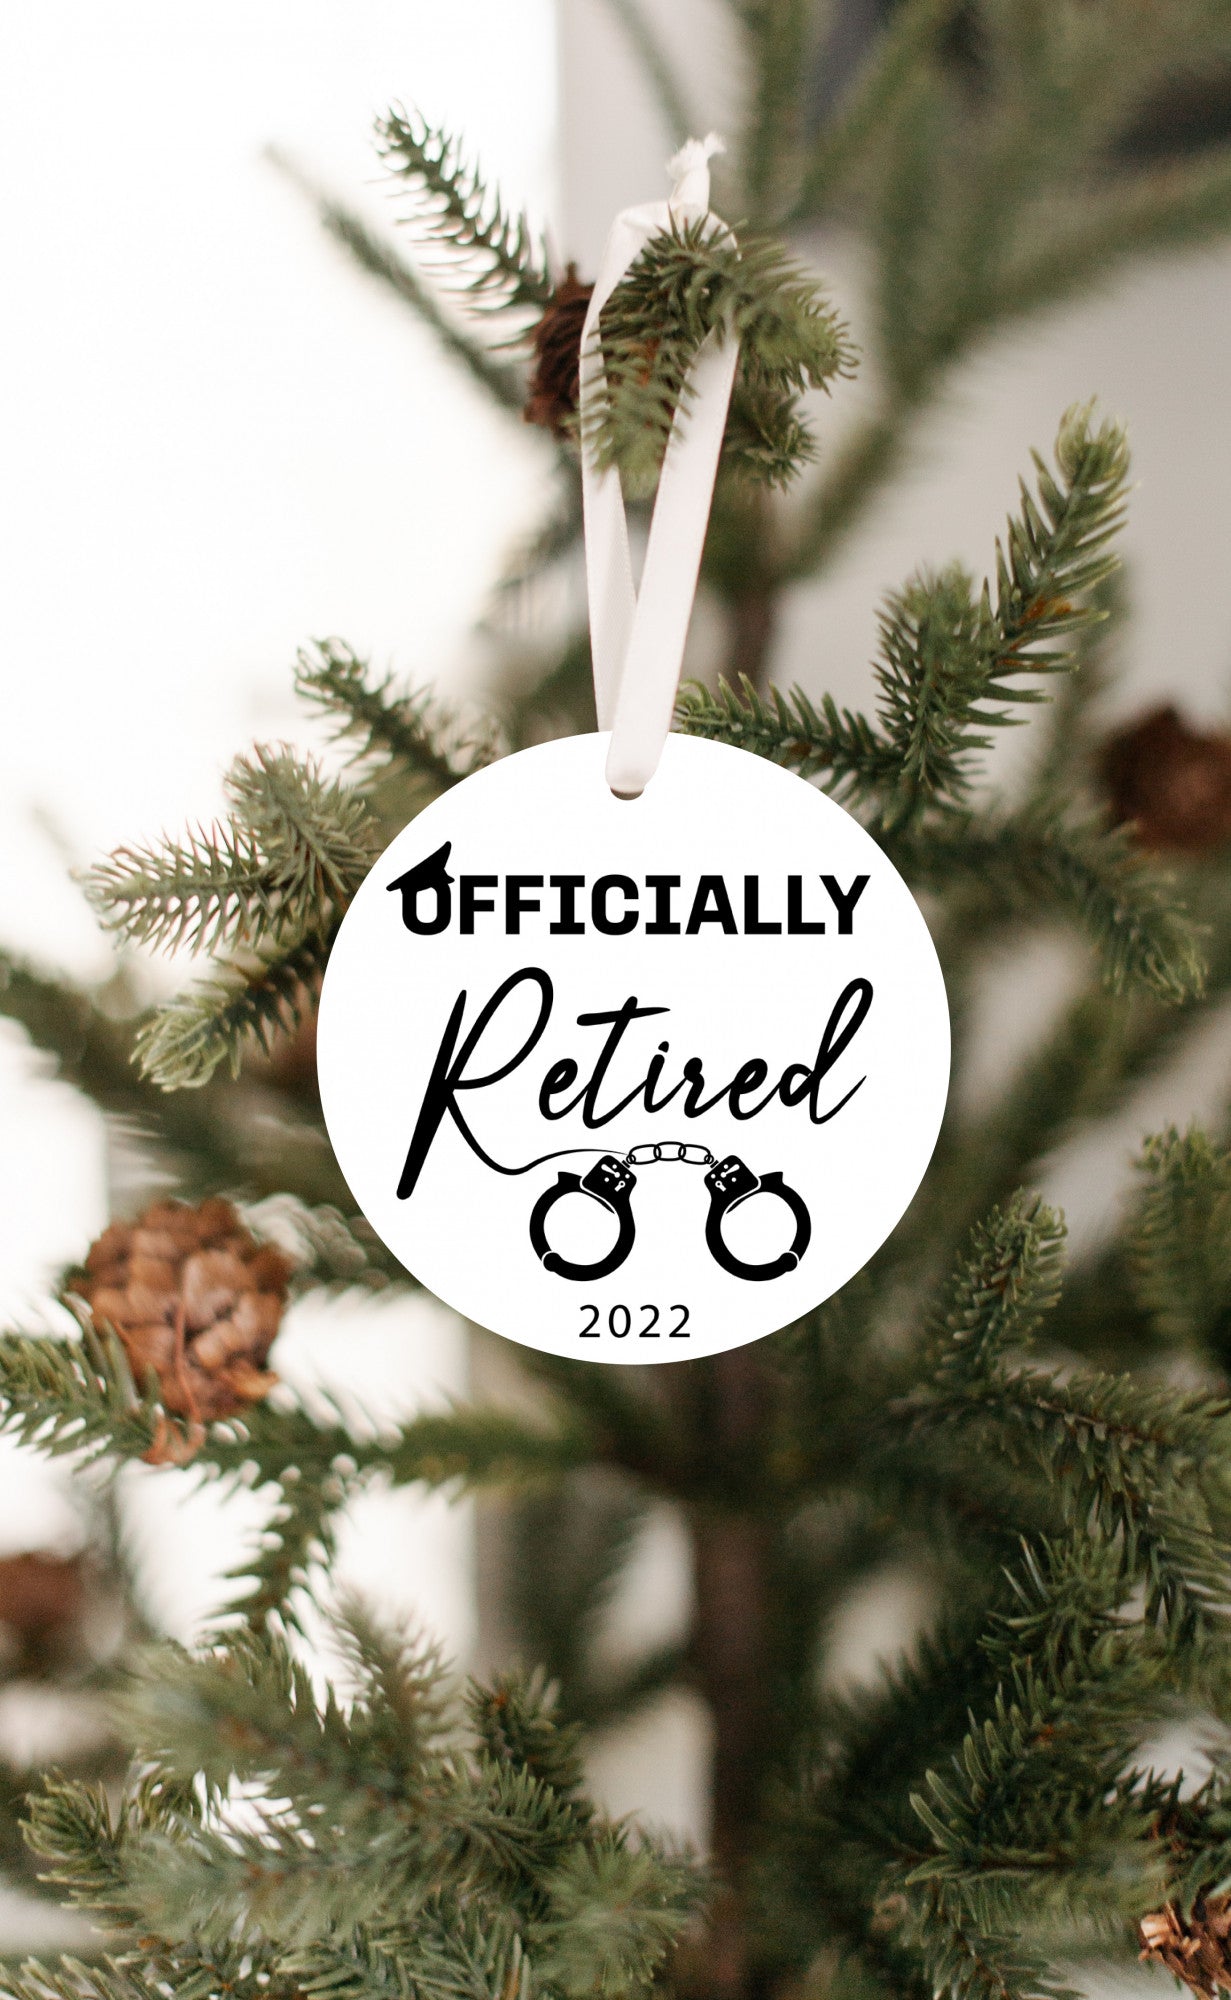 Police Officially Retired 2022 Ornament